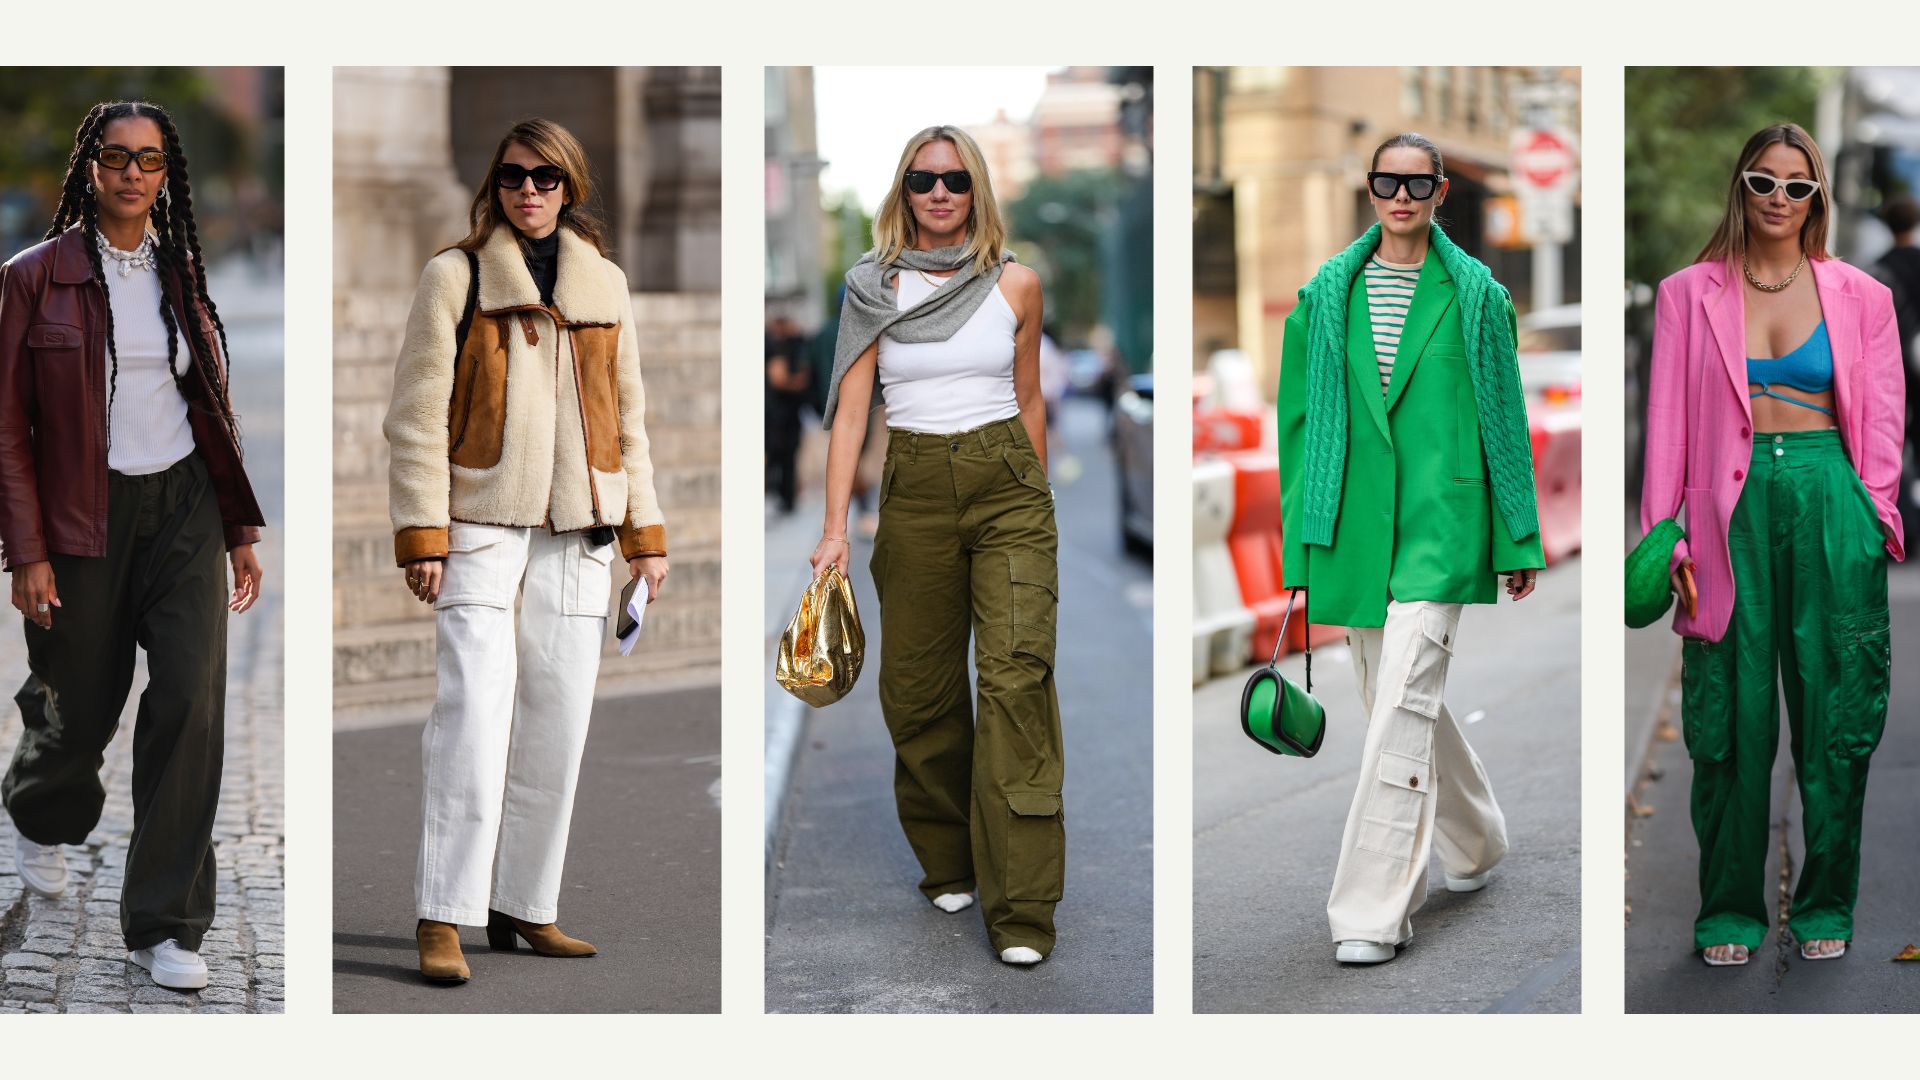 Cargos have made a come-back: this is how to wear them now - Vogue  Scandinavia